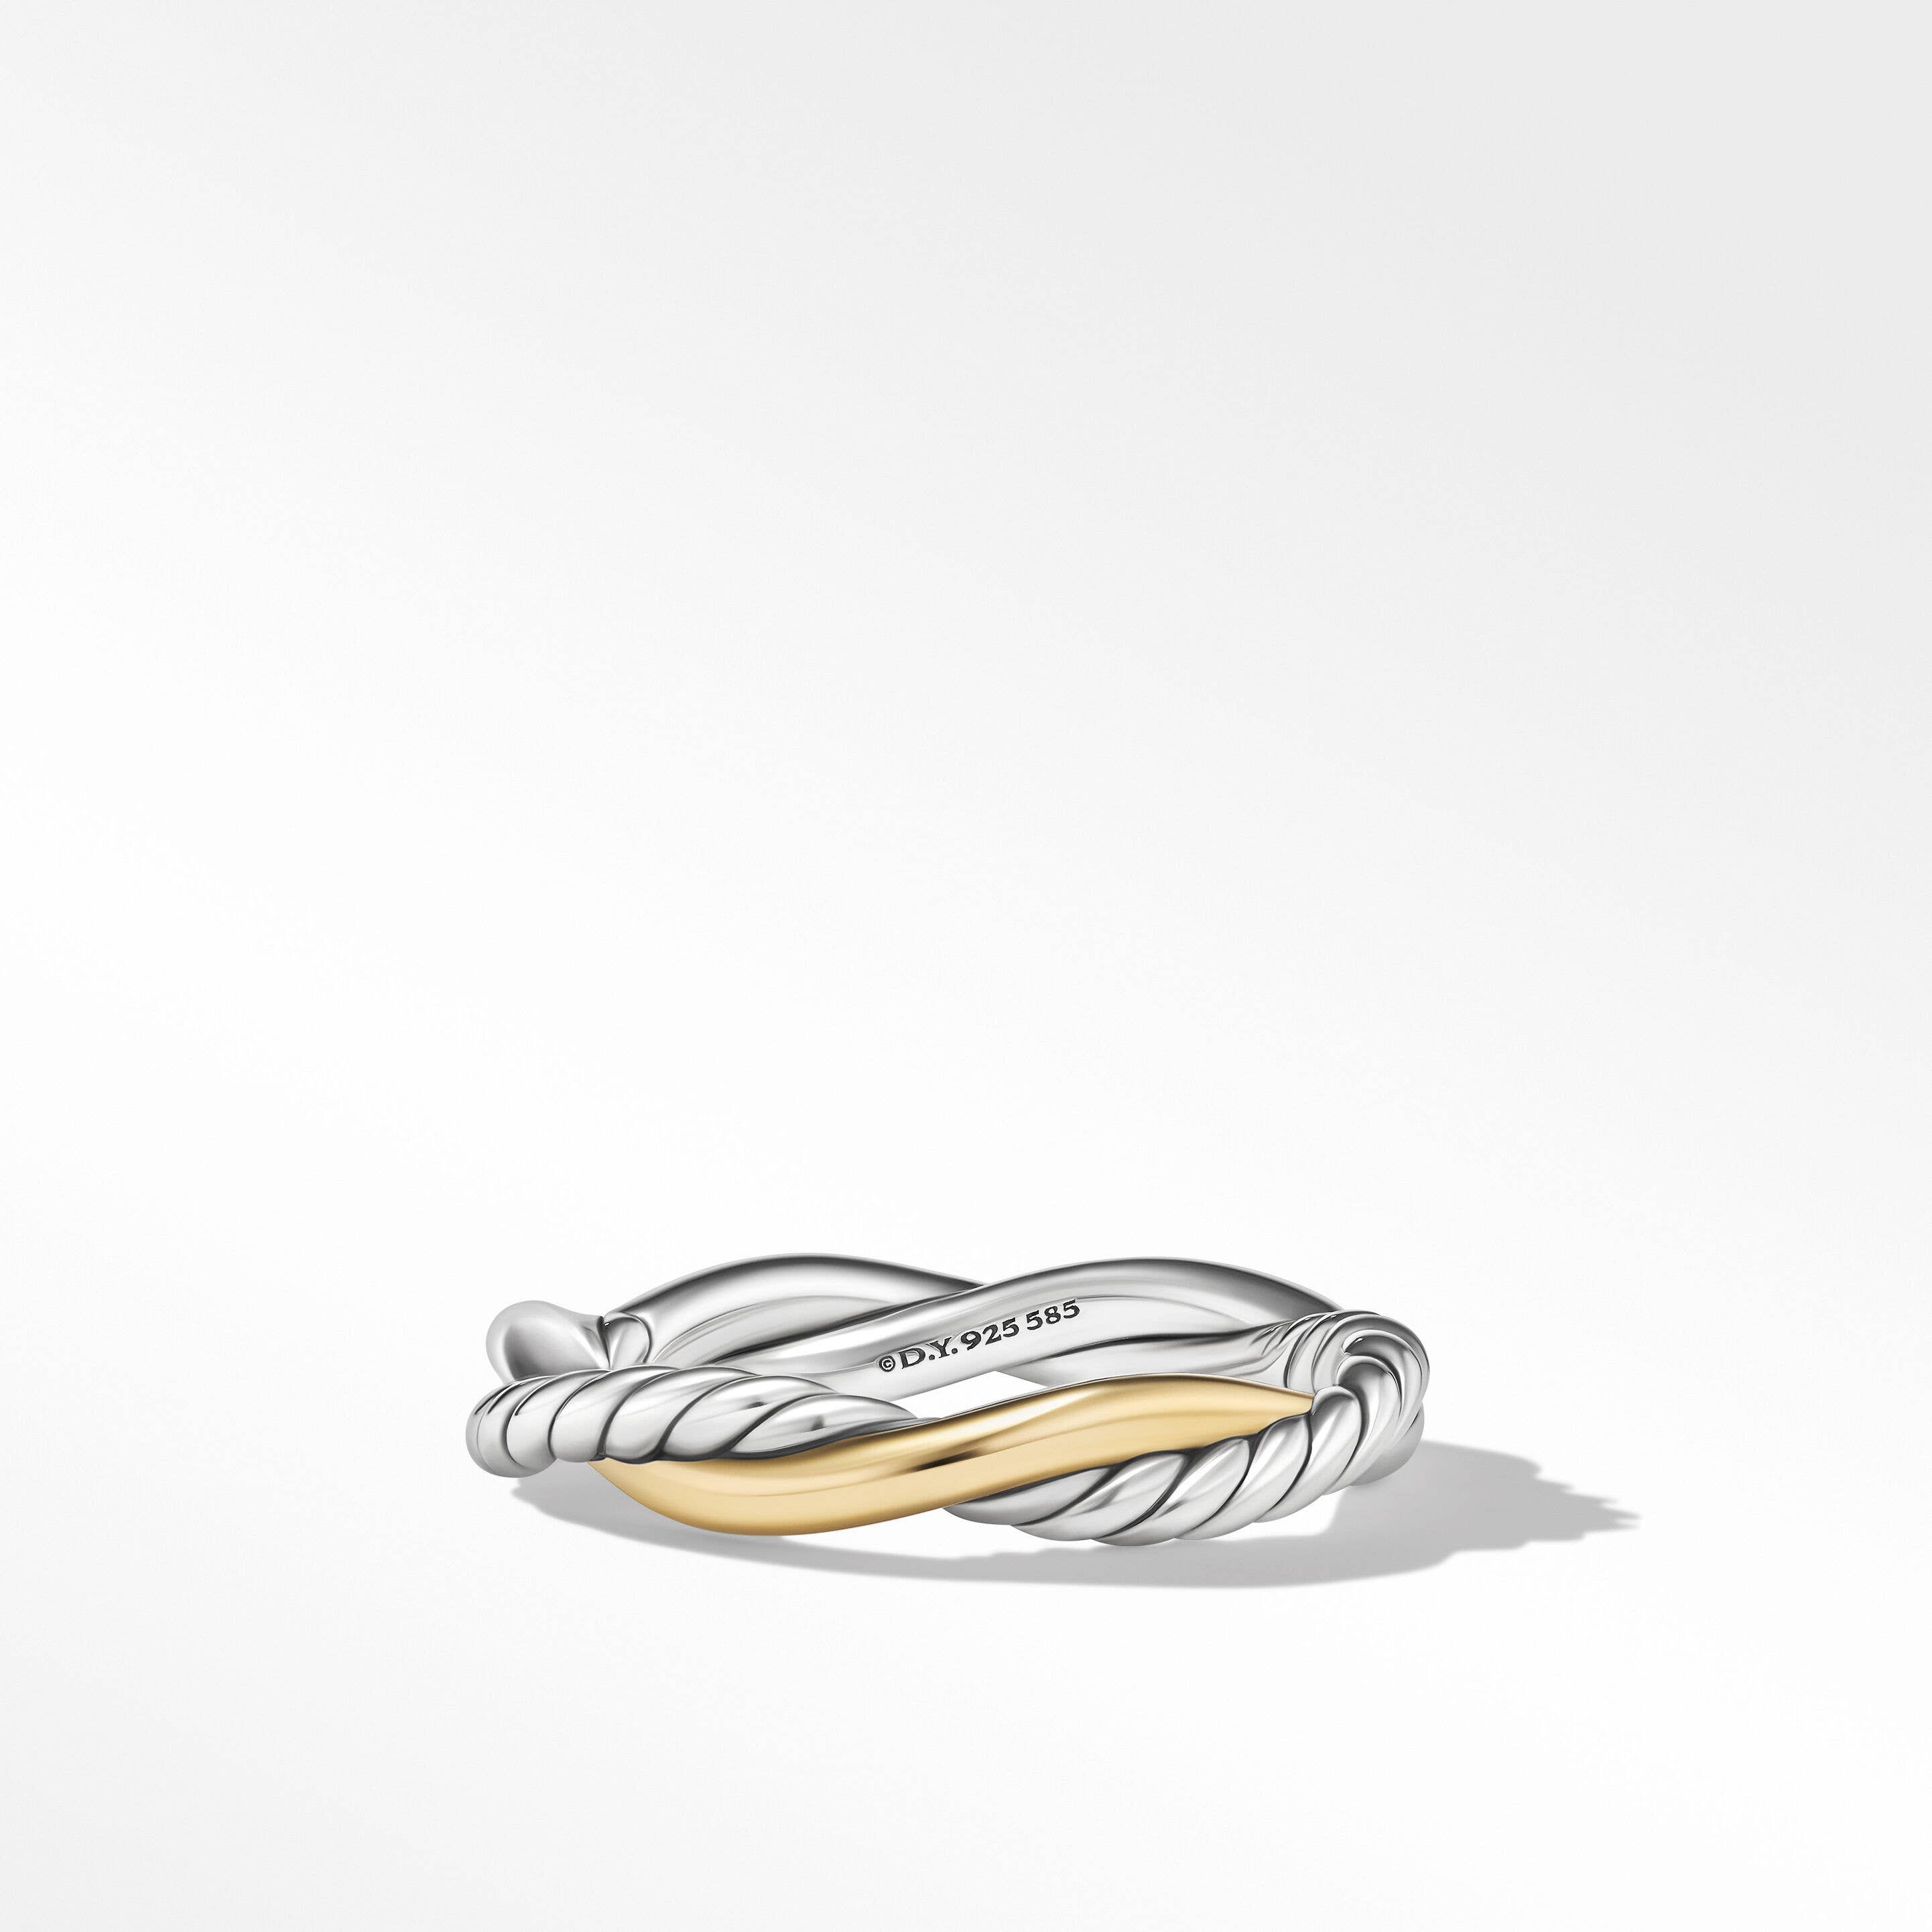 Petite Infinity Band Ring in Sterling Silver with 14K Yellow Gold